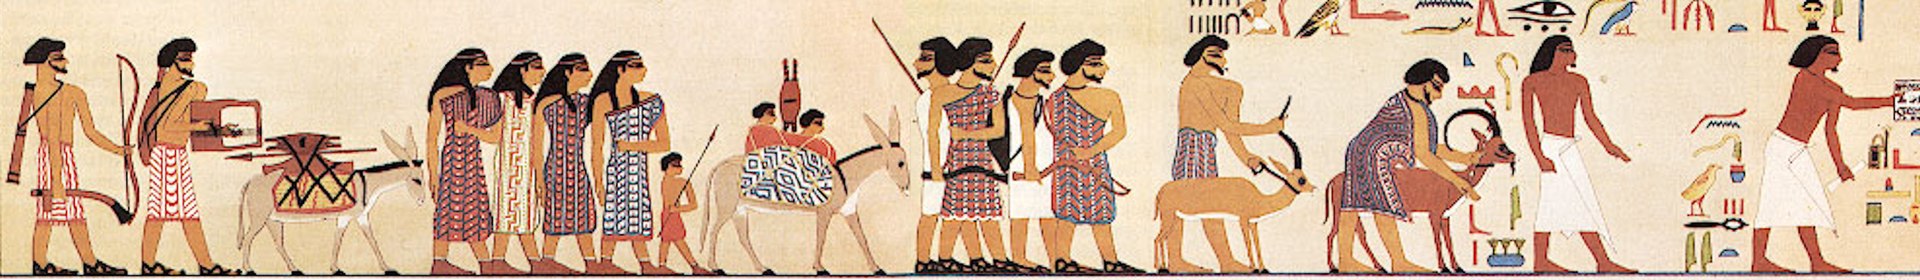 [[File:Drawing of the procession of the Aamu group tomb of Khnumhotep II at Beni Hassan.jpg|Drawing of the procession of the Aamu group tomb of Khnumhotep II at Beni Hassan]] Wikipedia